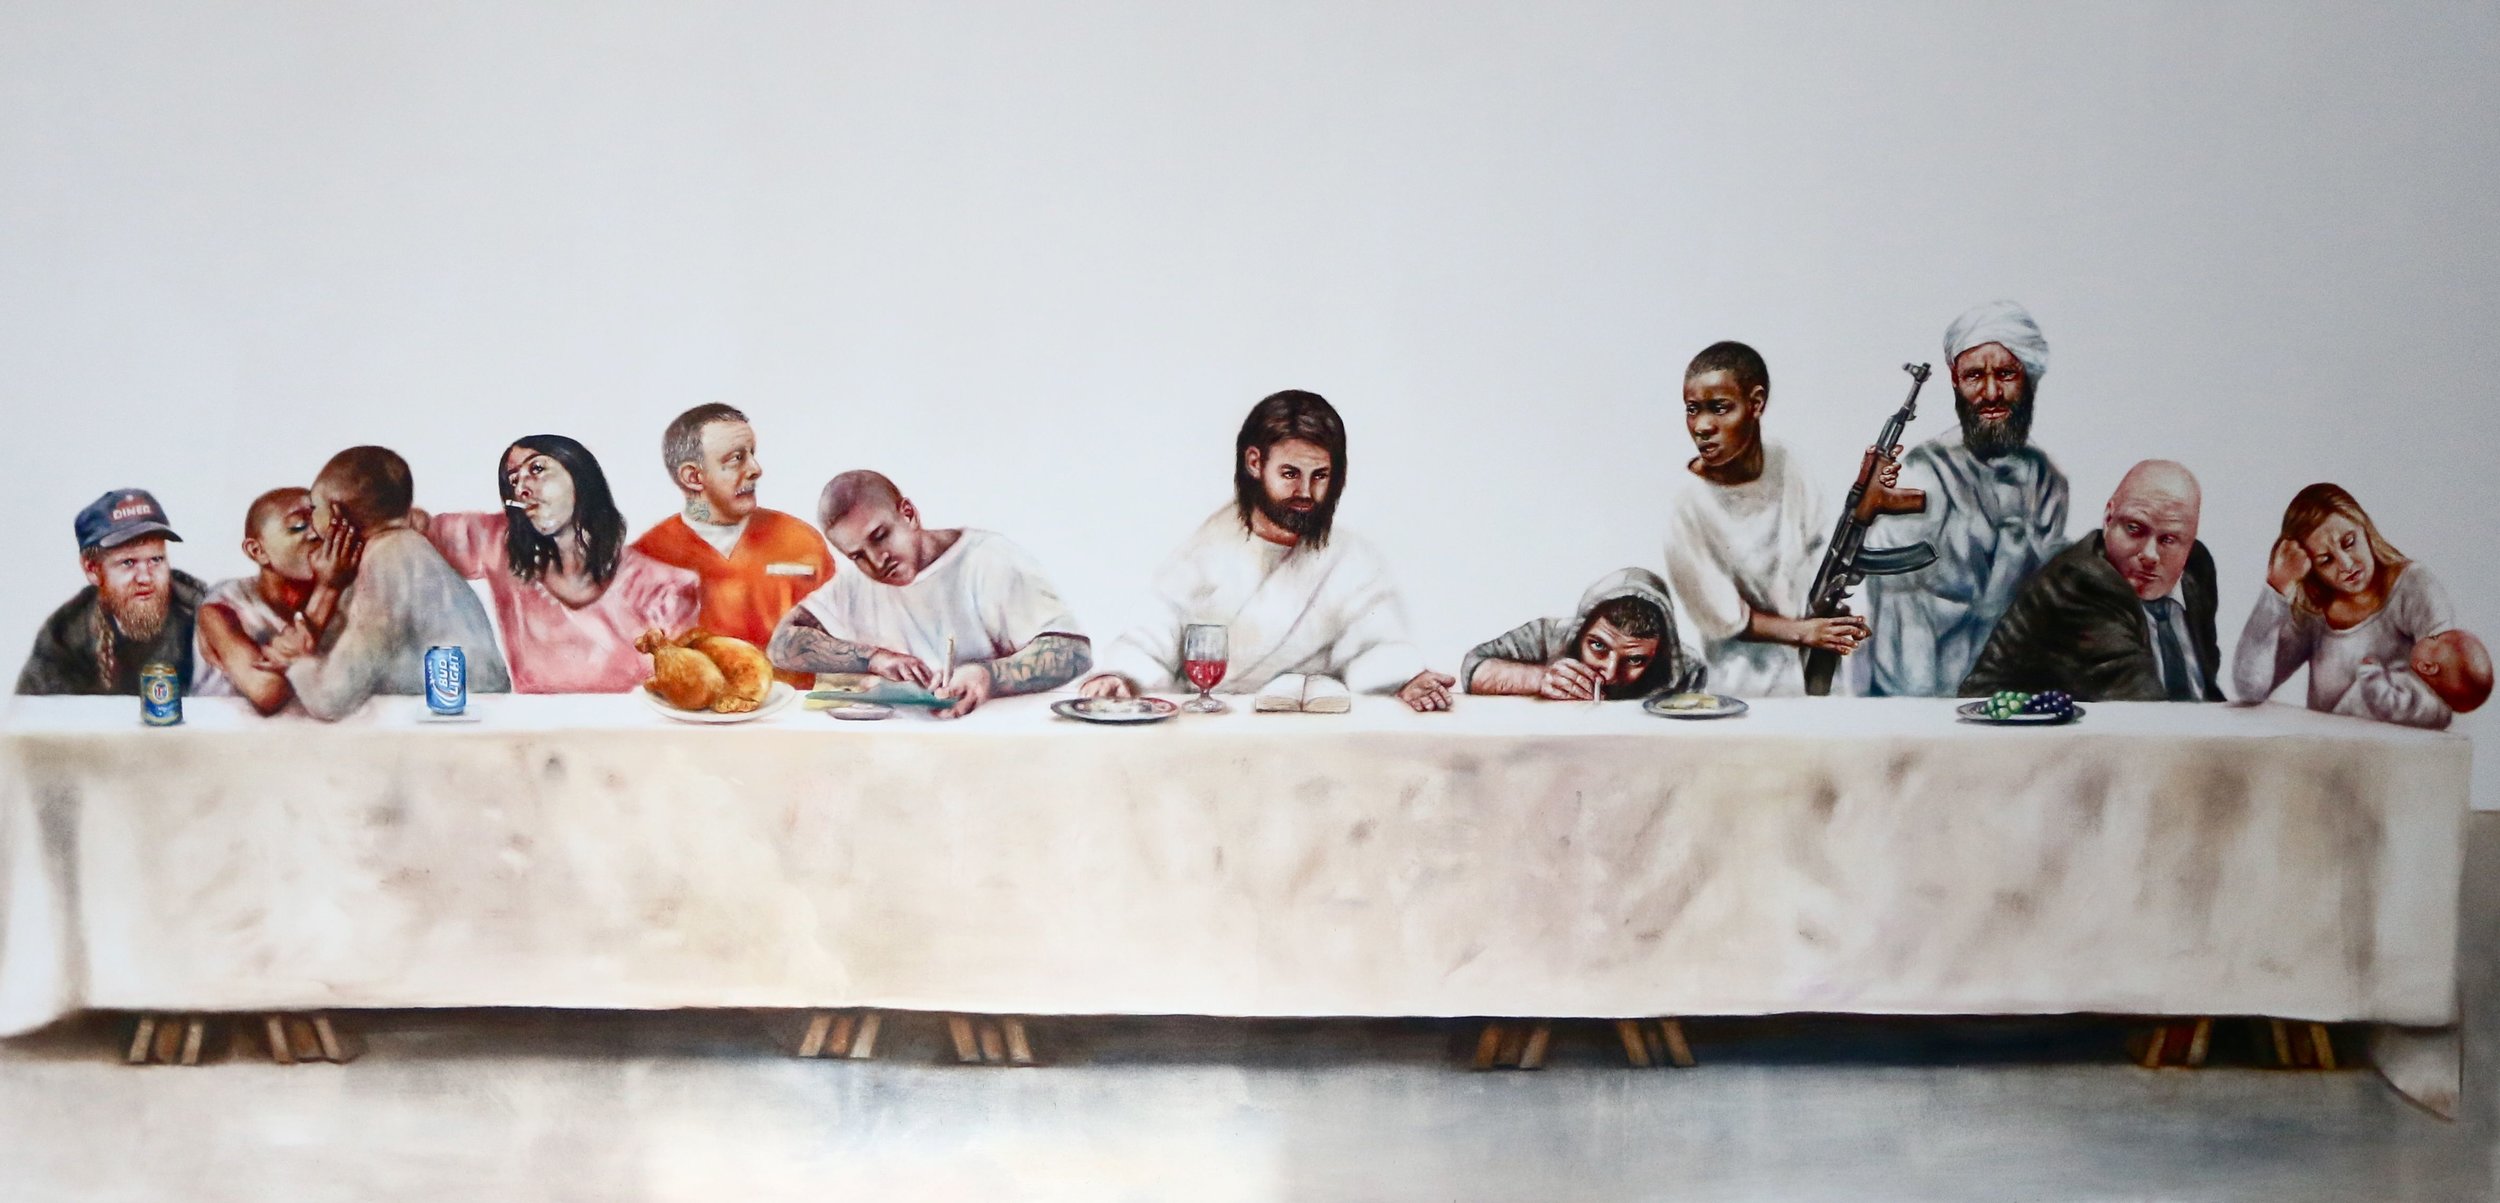  Johan Andersson 'Last Supper'. 